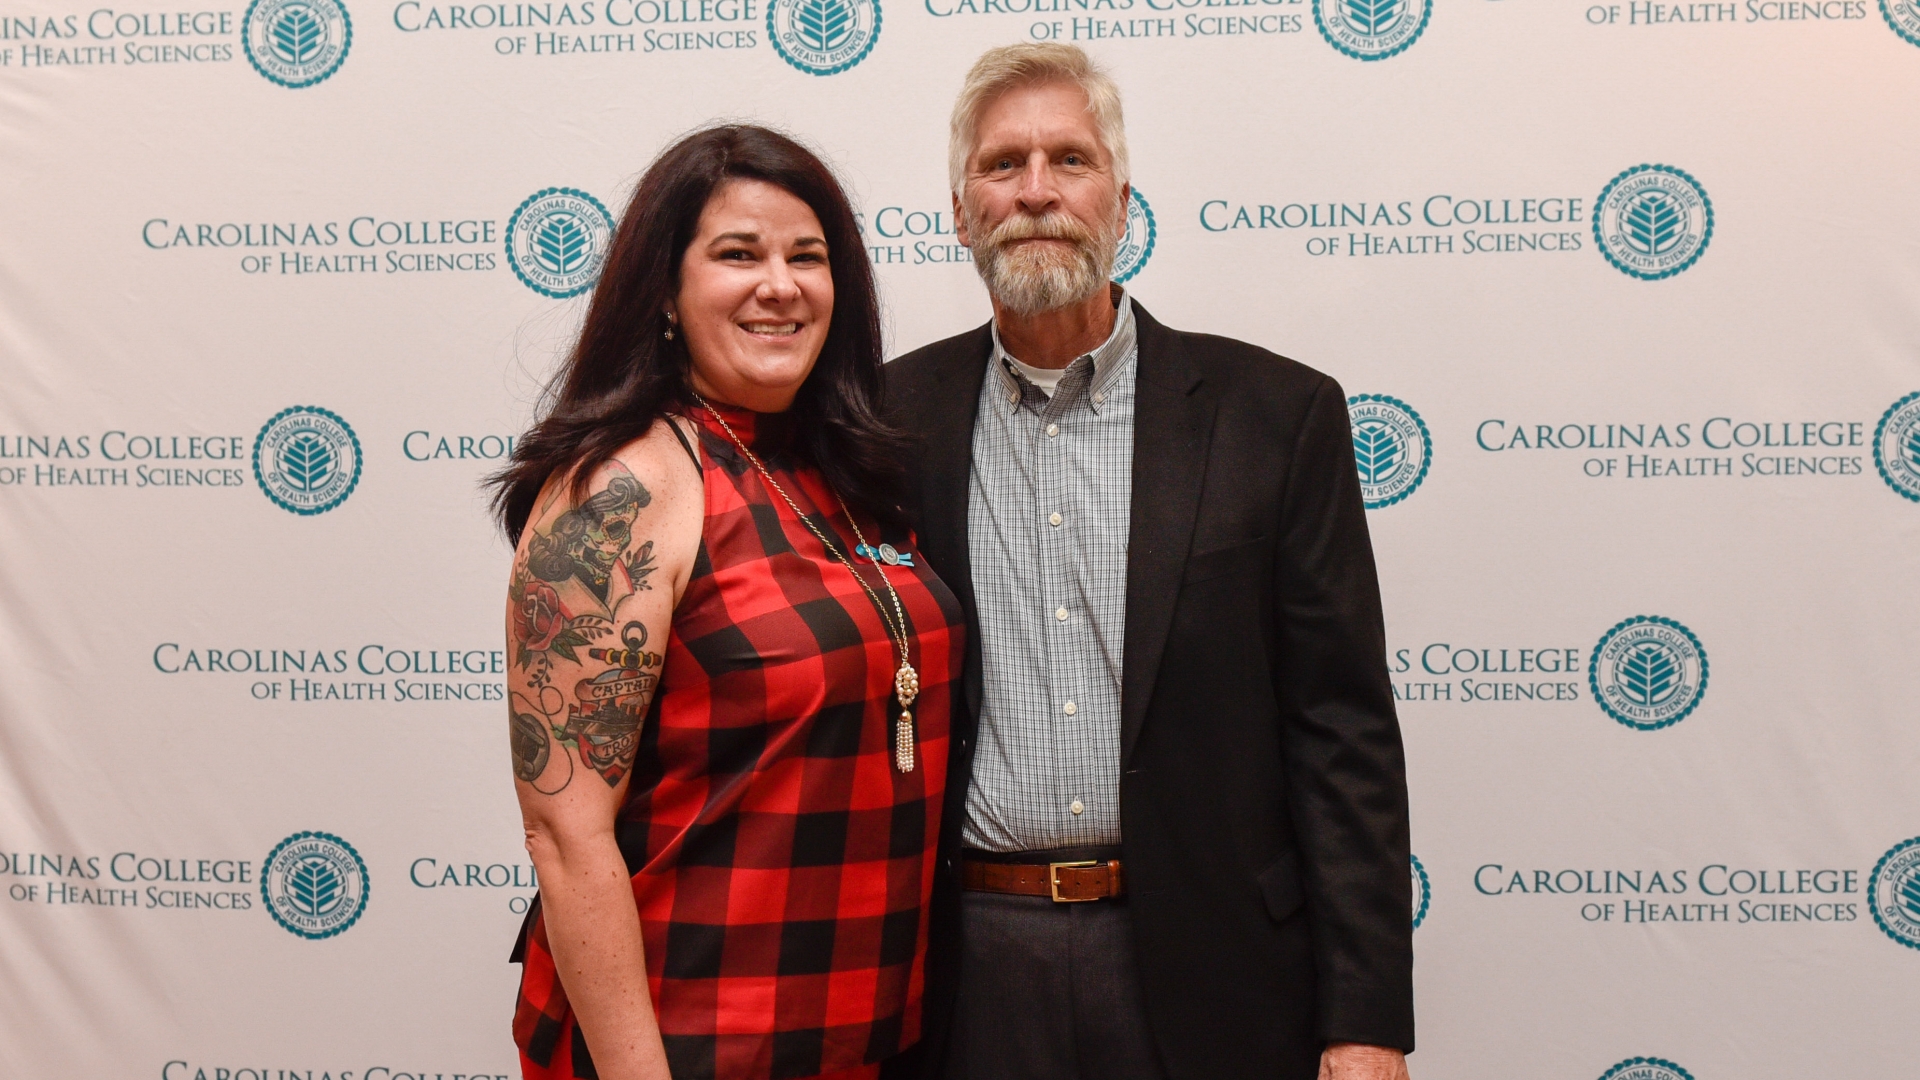 Dick Winters, a cardiac arrest patient, poses with Julia Rouse, a nursing student from Carolinas College of Health Sciences who saved his life. 